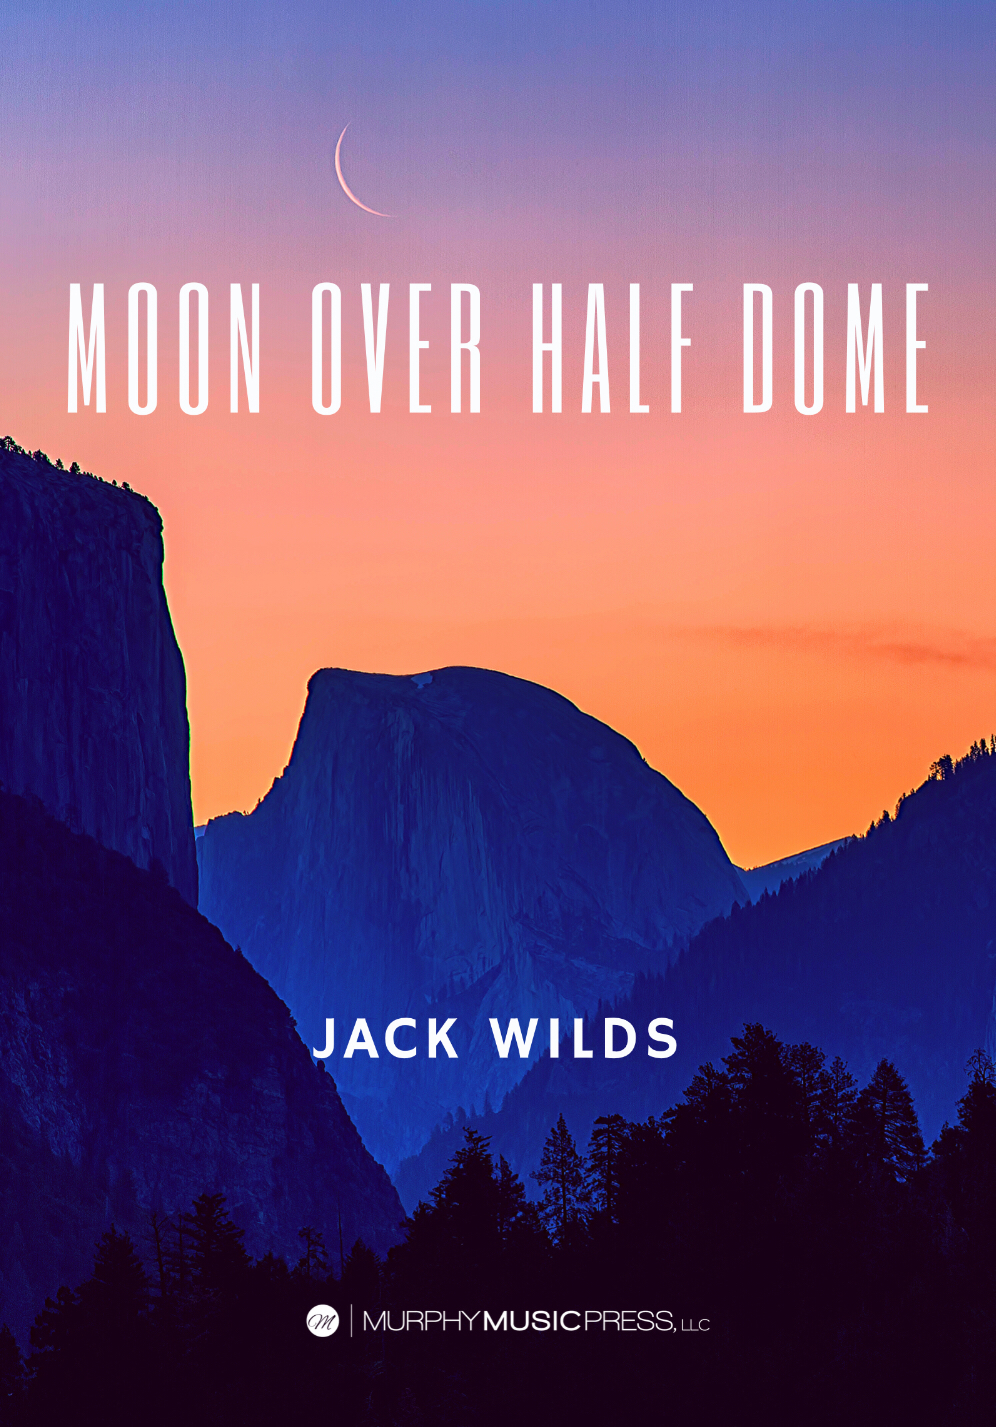 Moon Over Half Dome (Score Only) by Jack Wilds